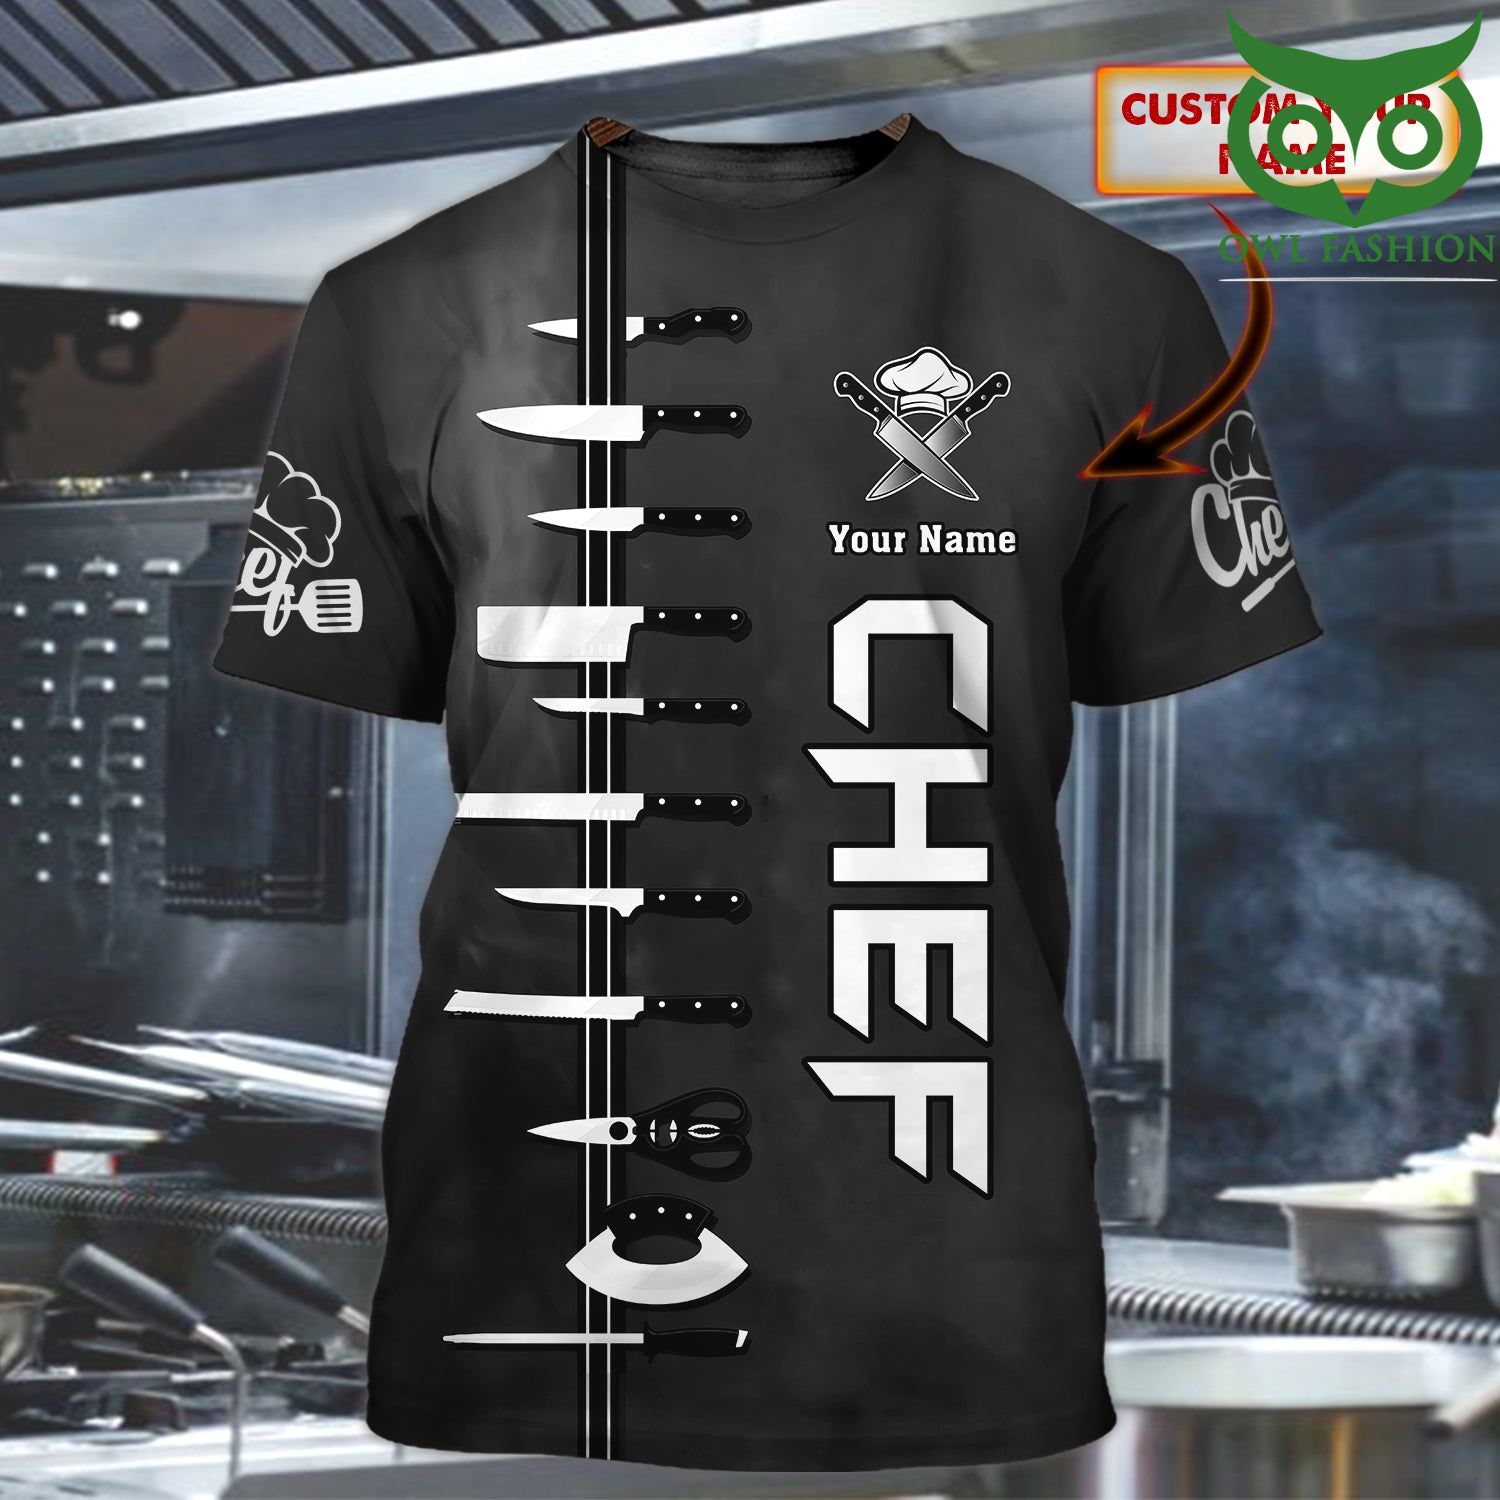 CHEF Knives Personalized Name black 3D Tshirt